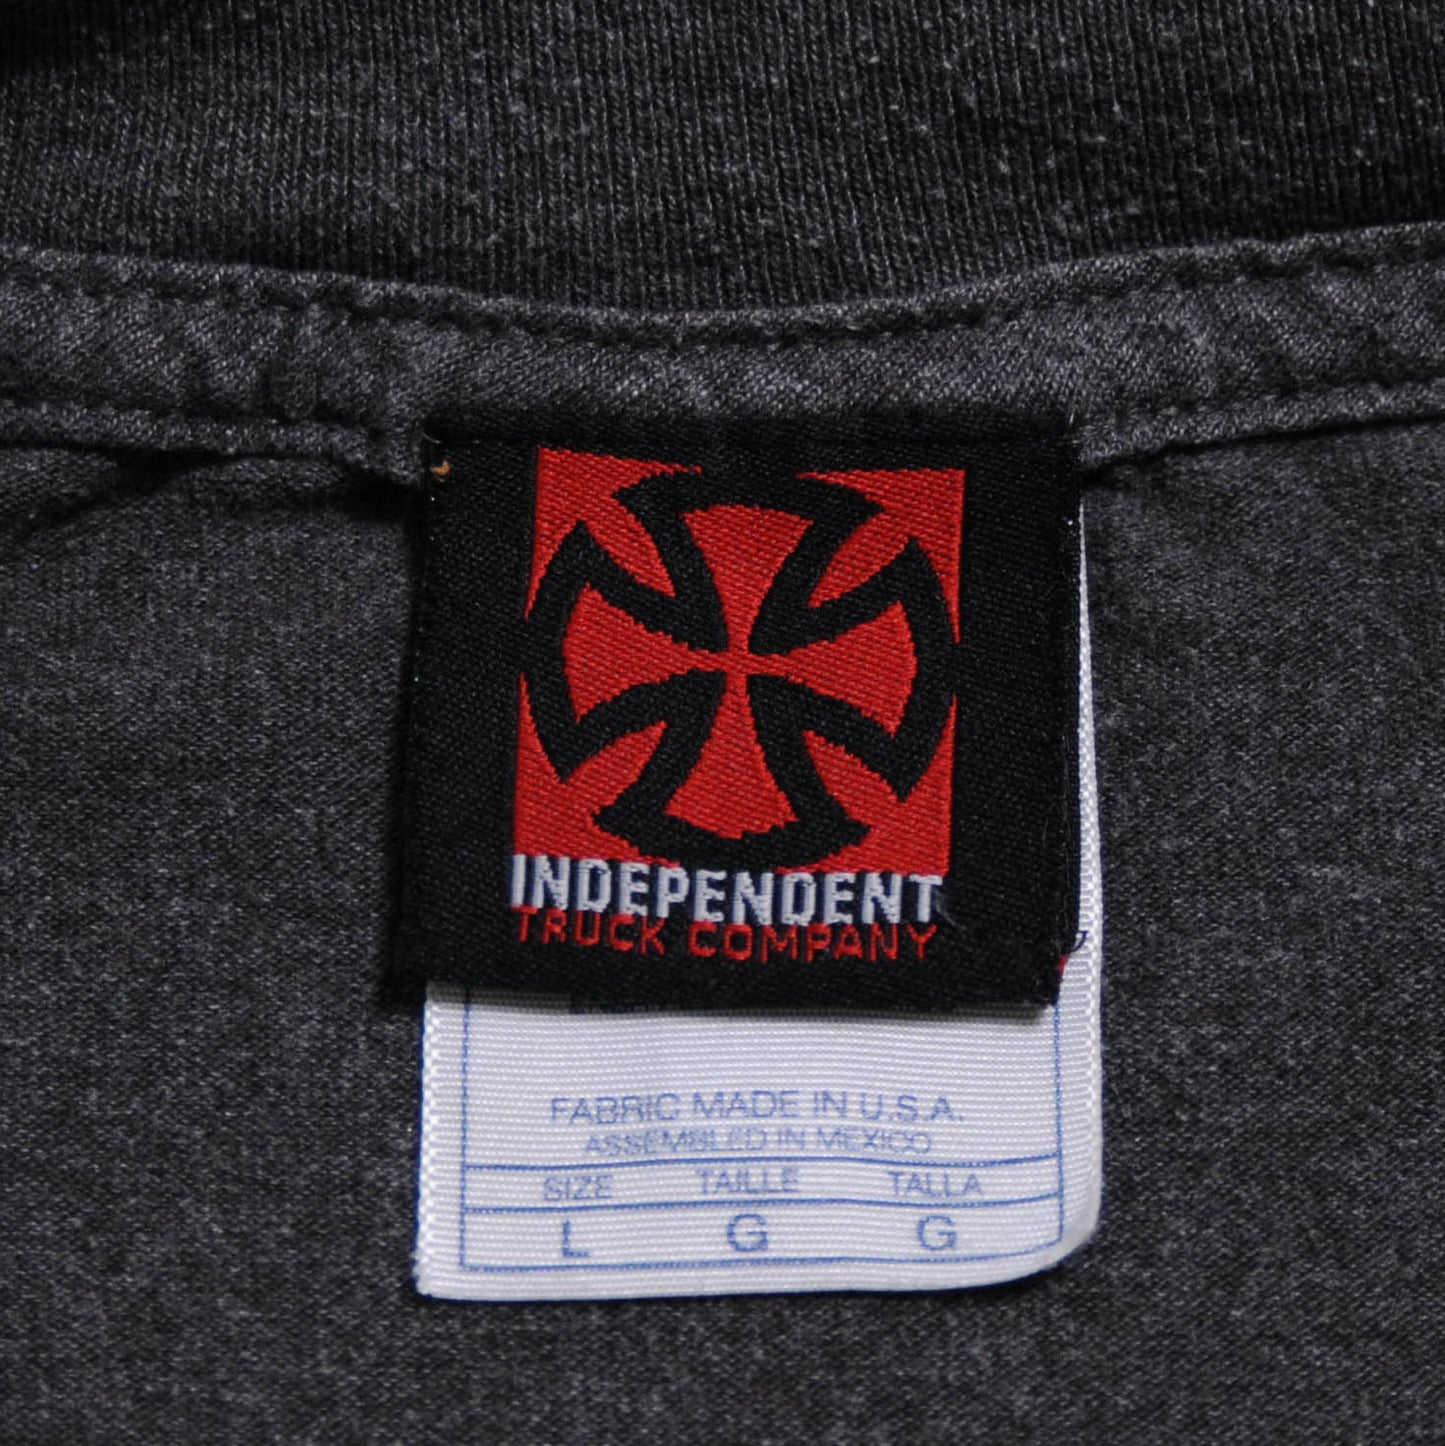 90's INDEPENDENT Tシャツ　(L)/A3028T-S